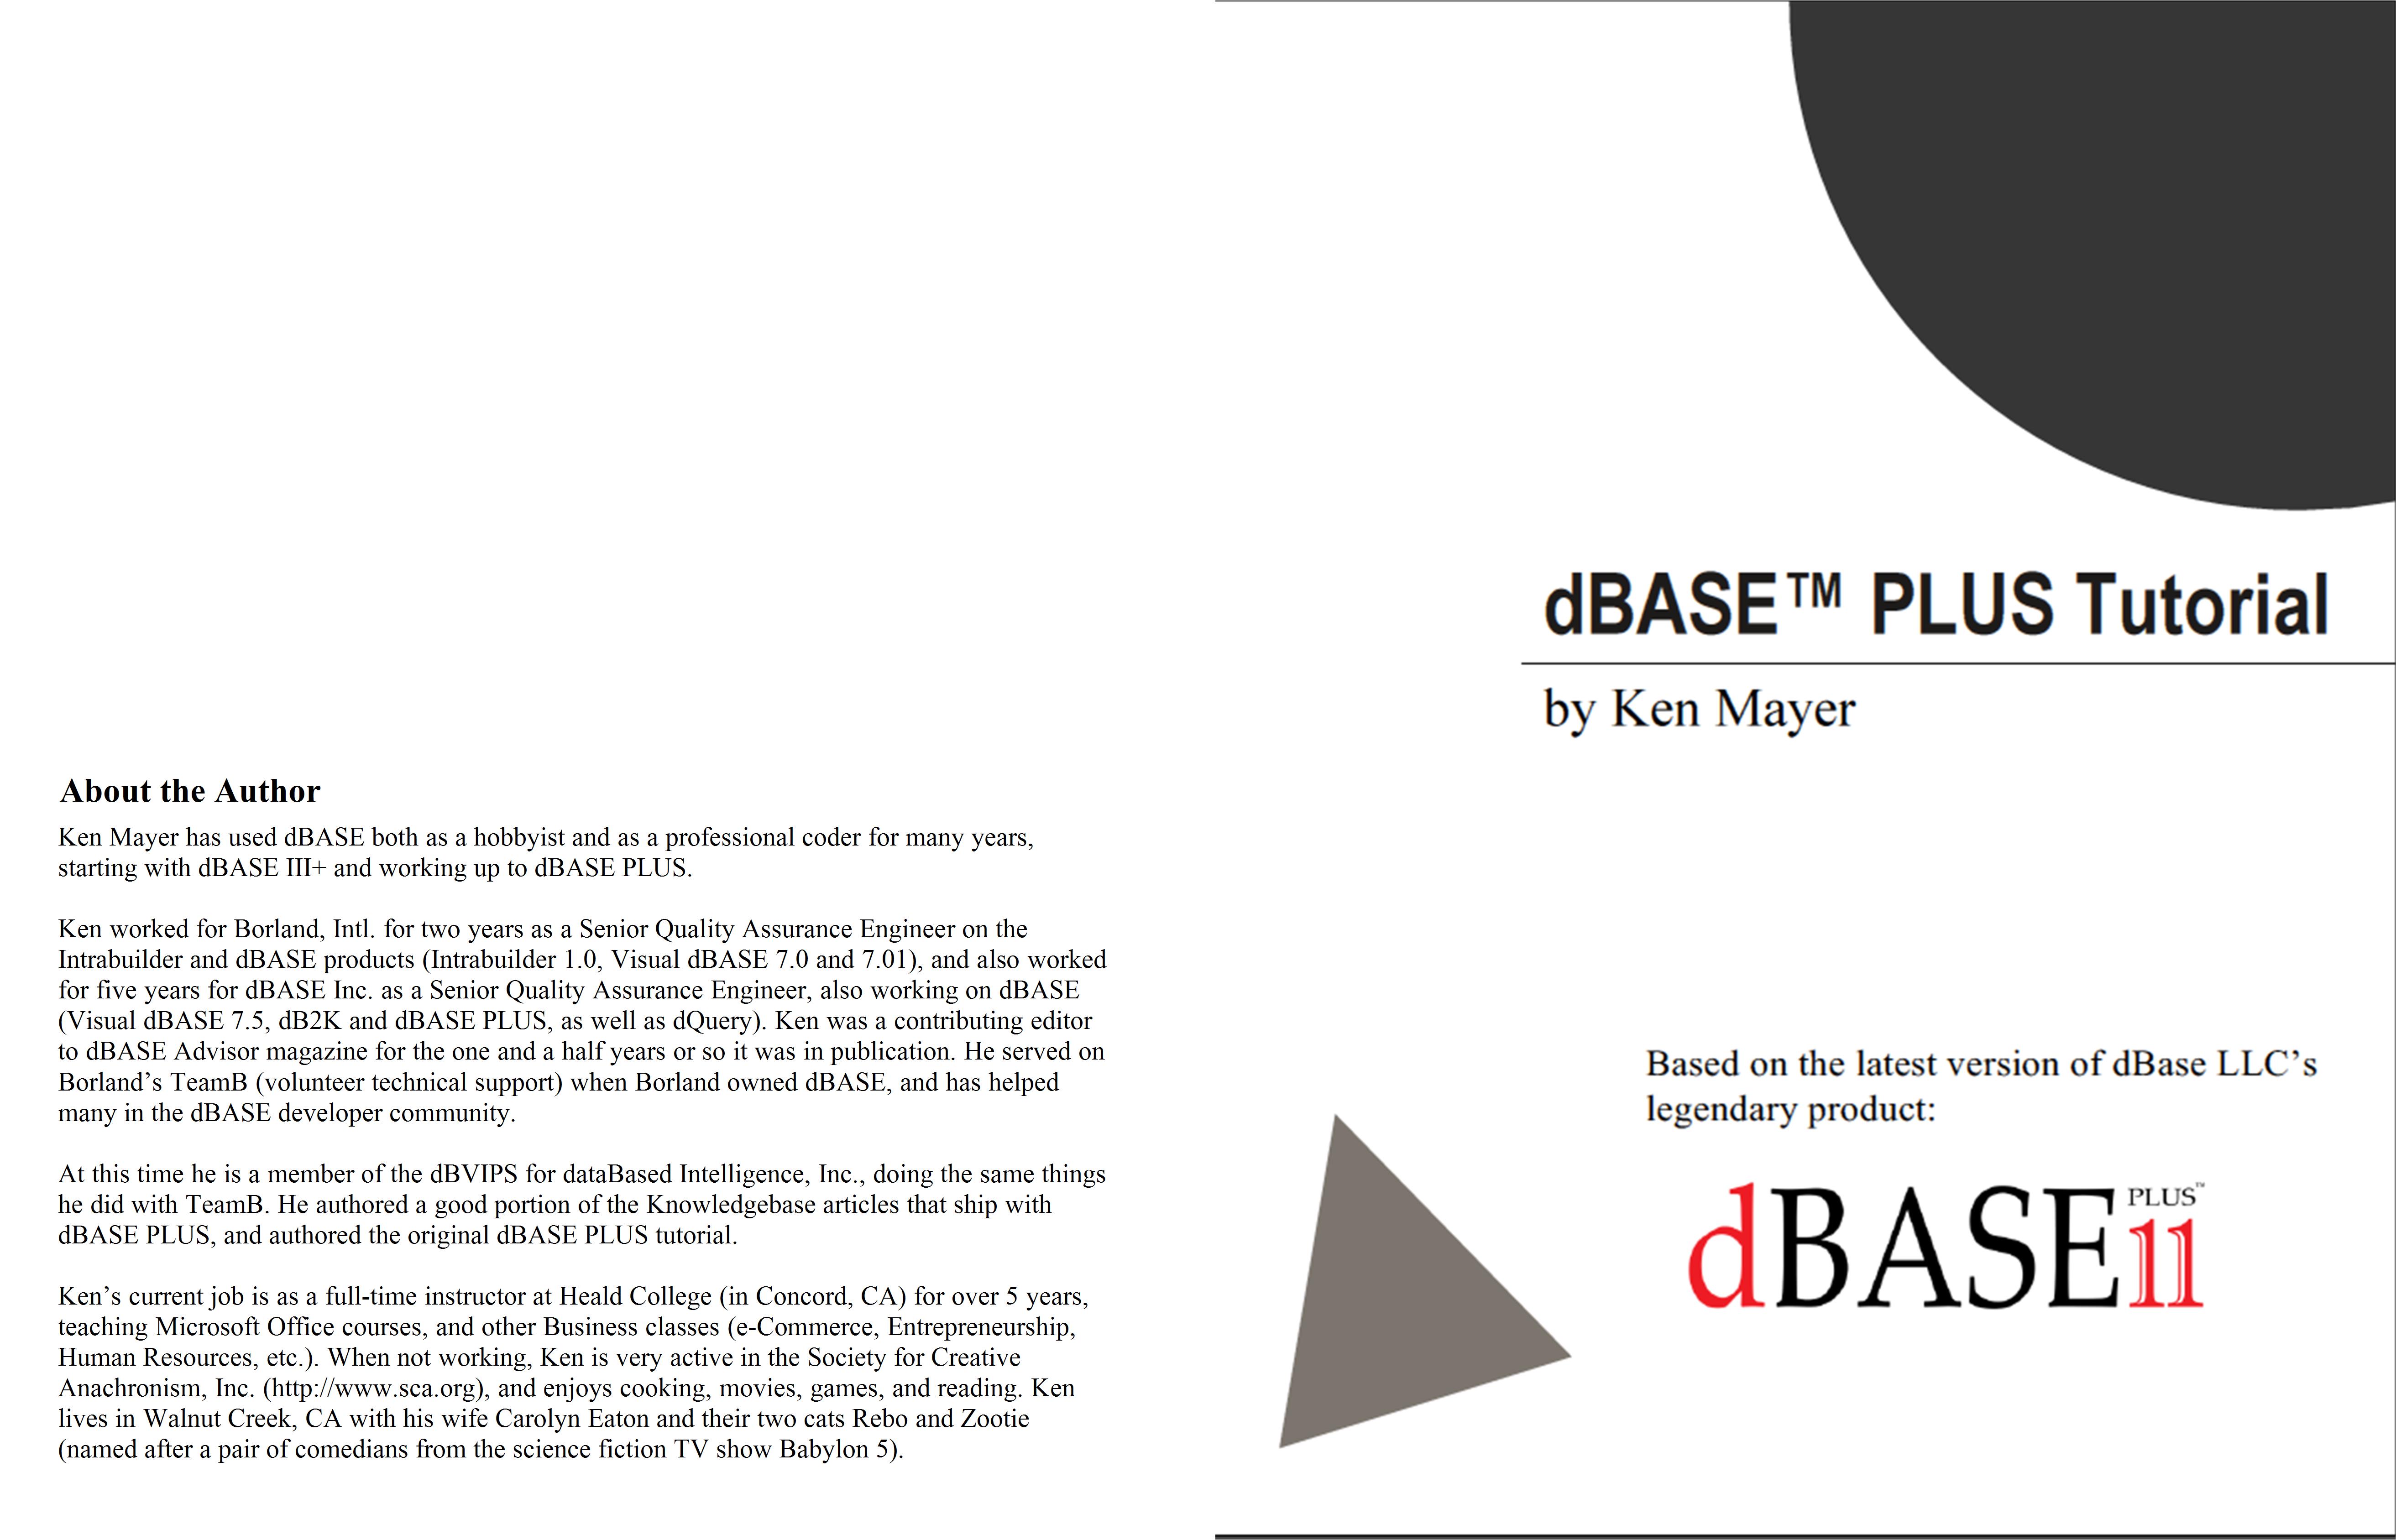 The dBASE PLUS Tutorial cover image